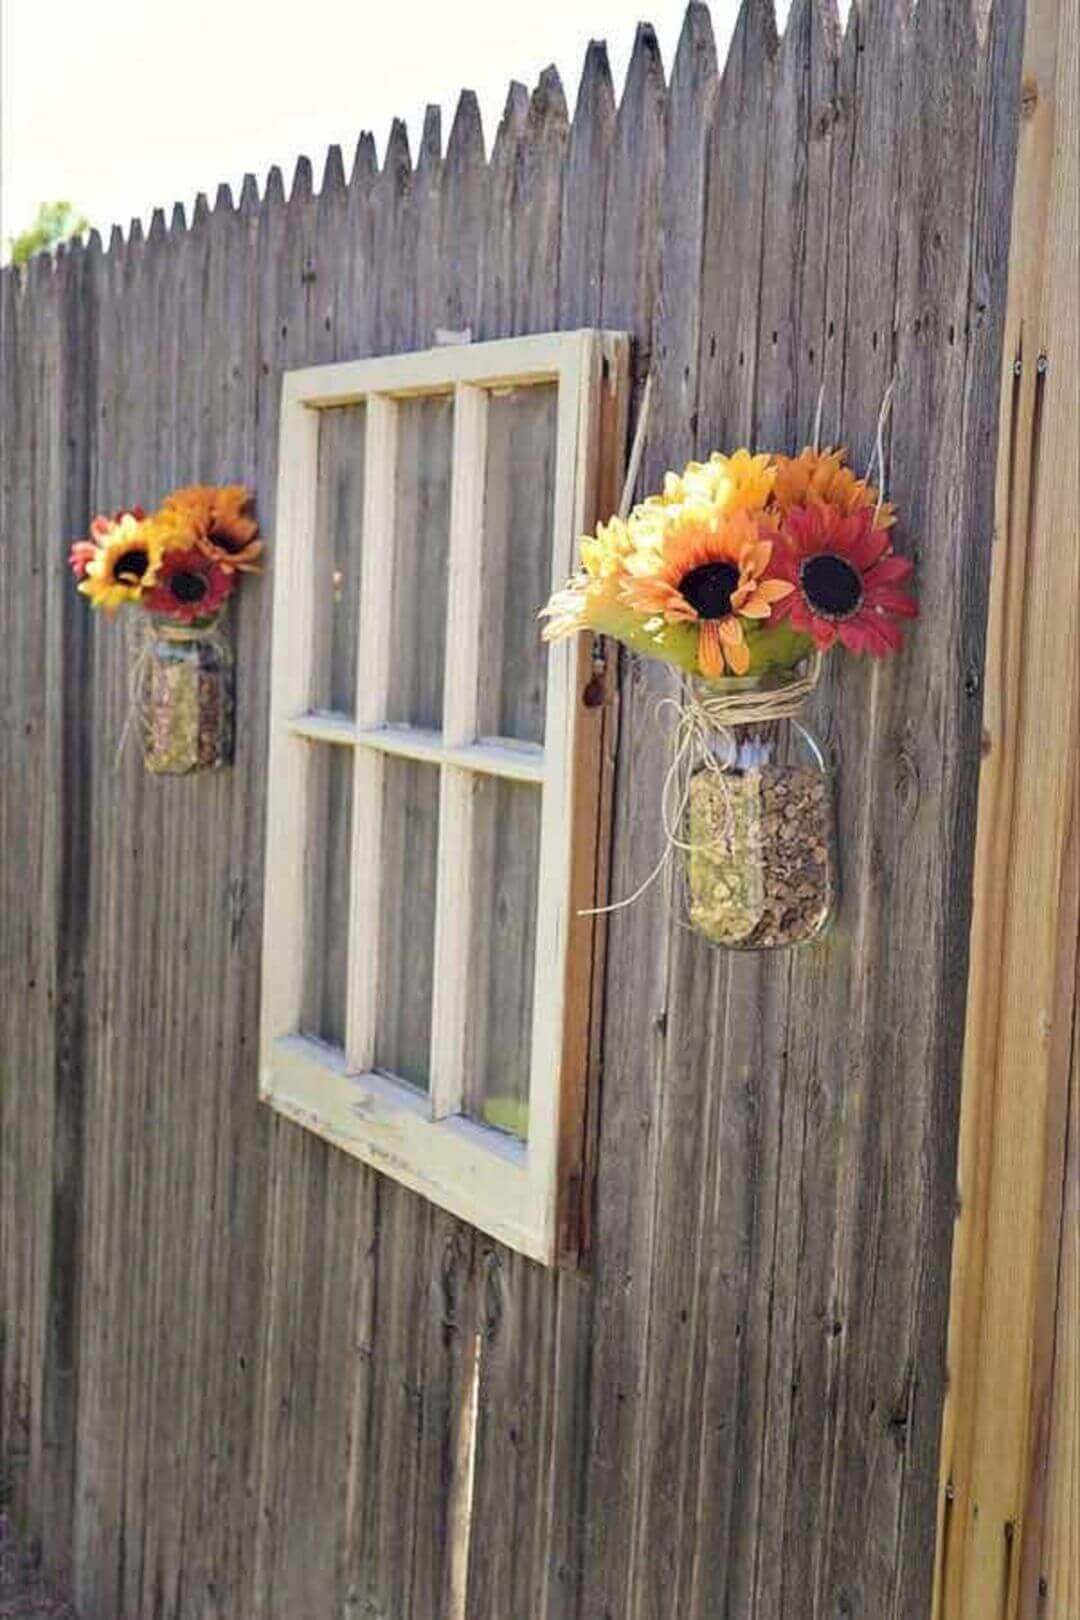 Reused Old Window with Charming Sunflowers